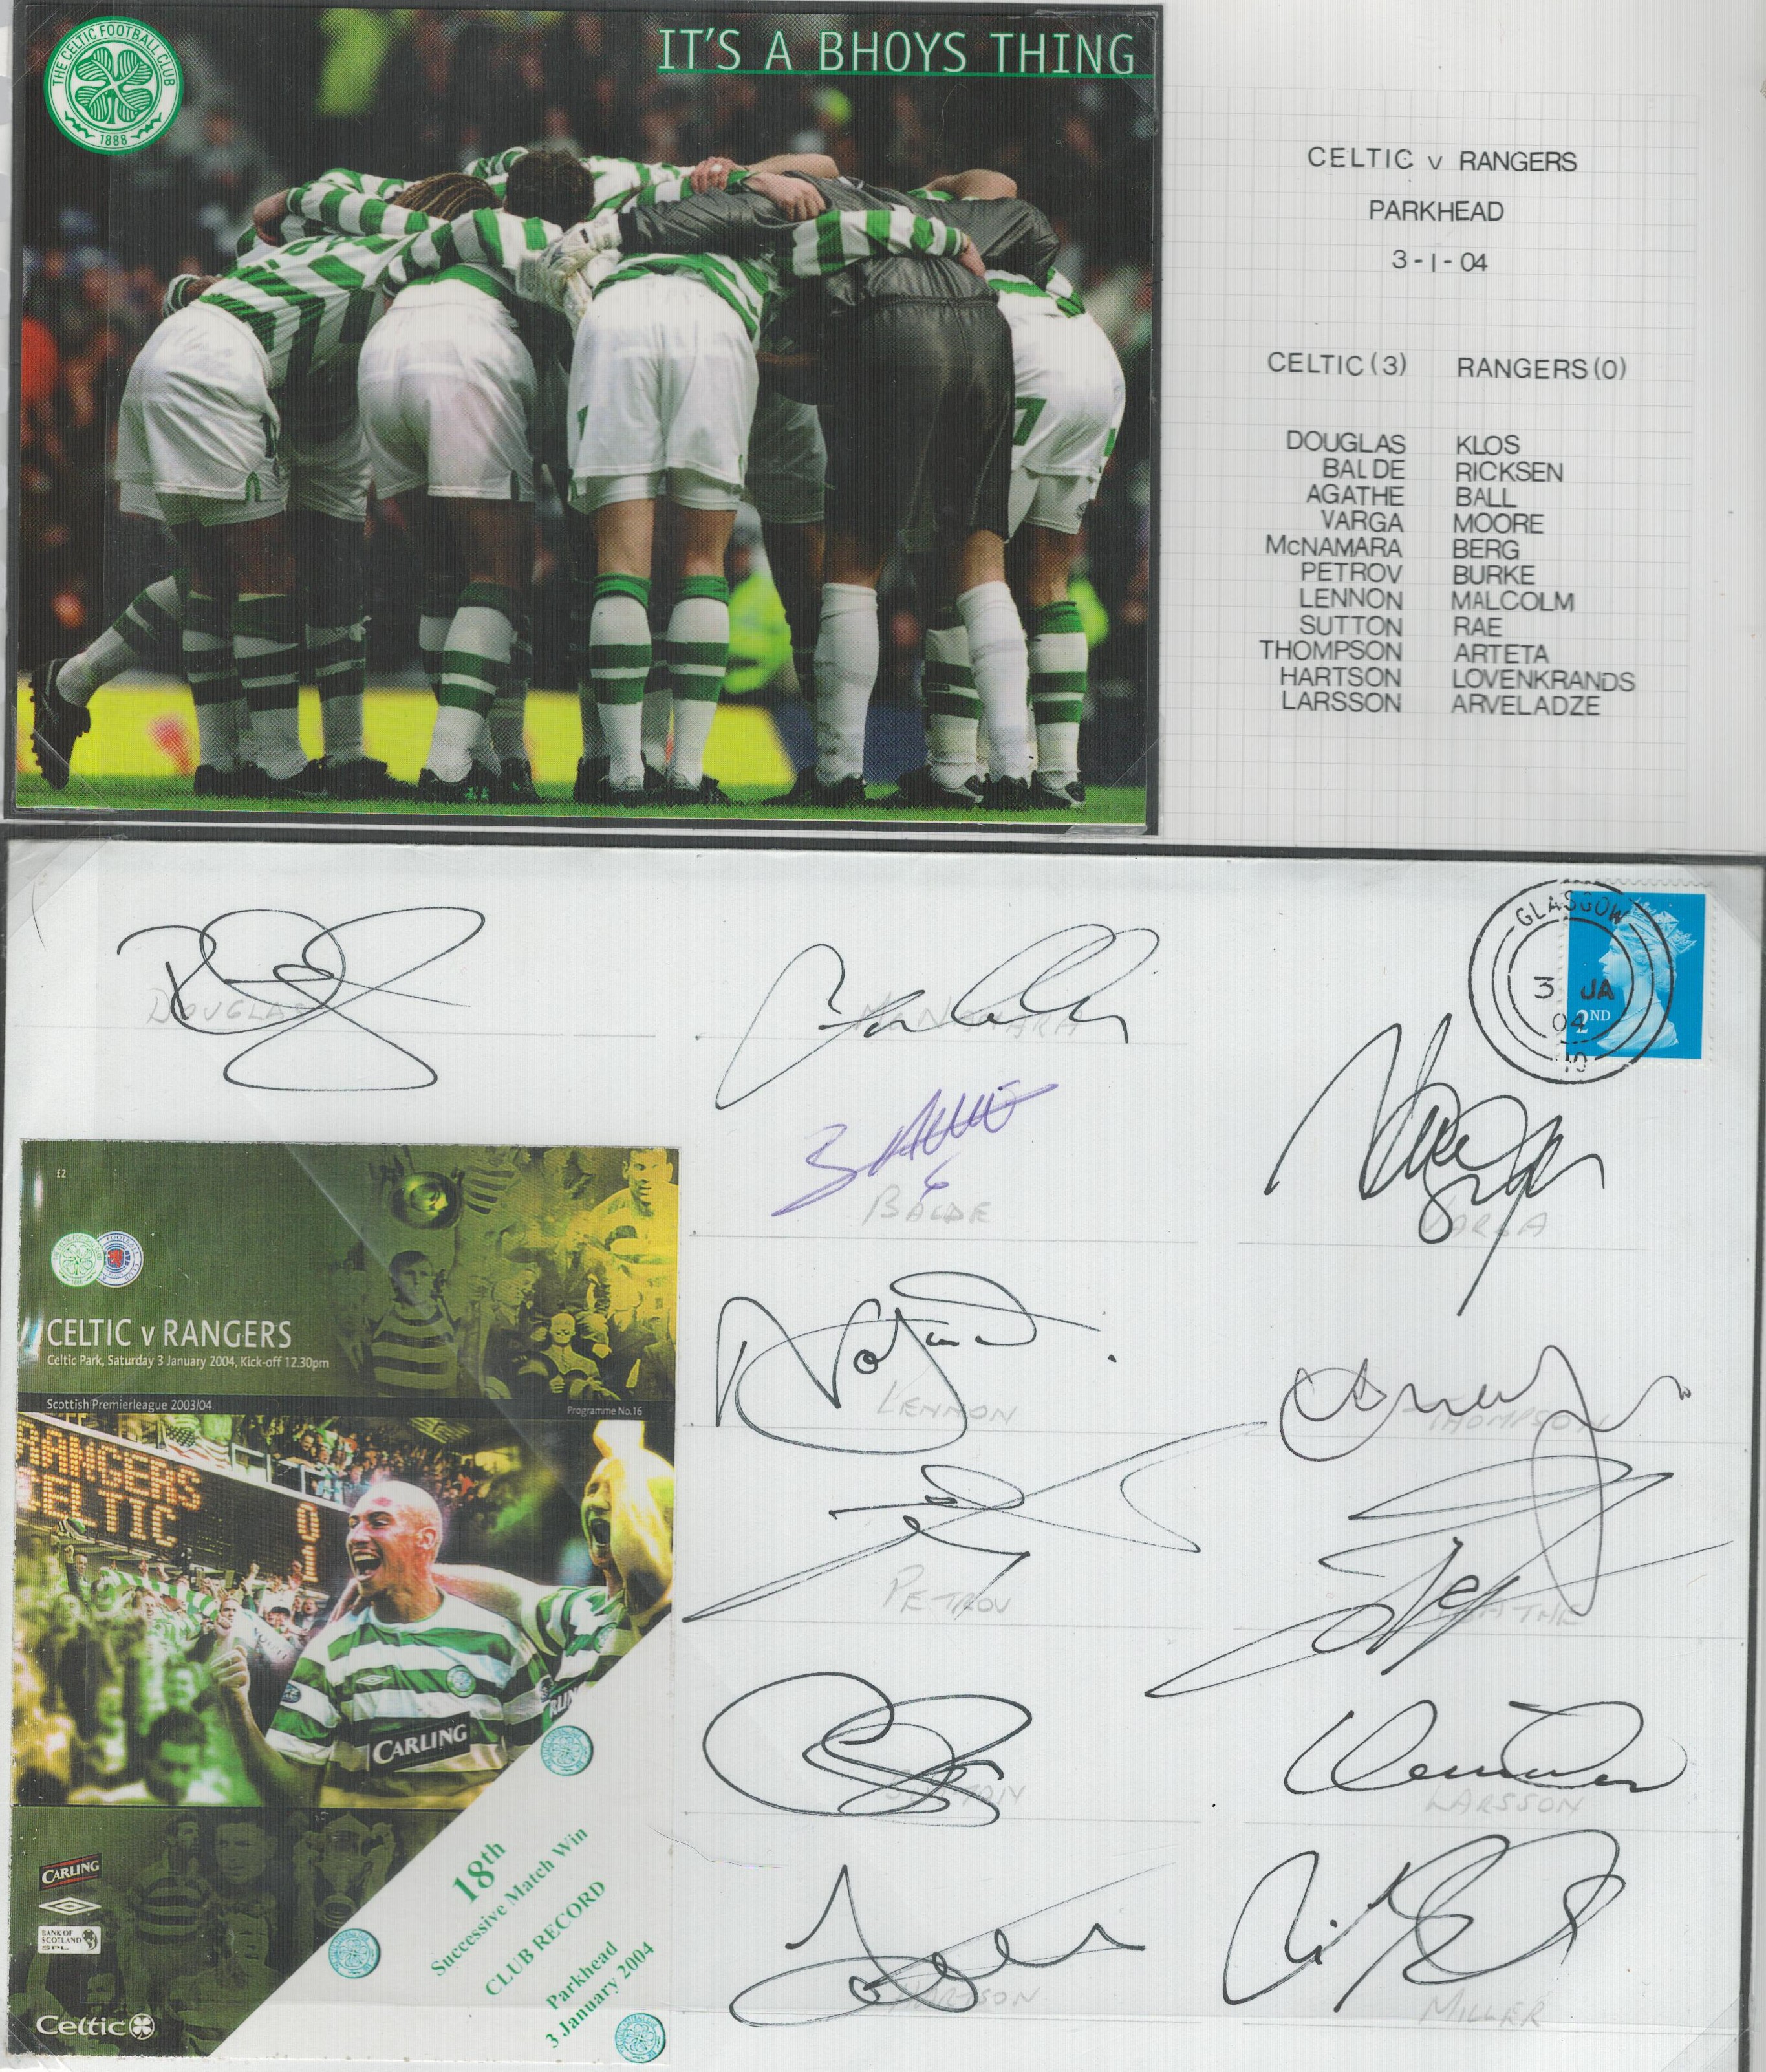 Football Celtic 12 team 2004 Rangers 18th match win multiple signed cover. Celtic won 3-1. 3/1/04